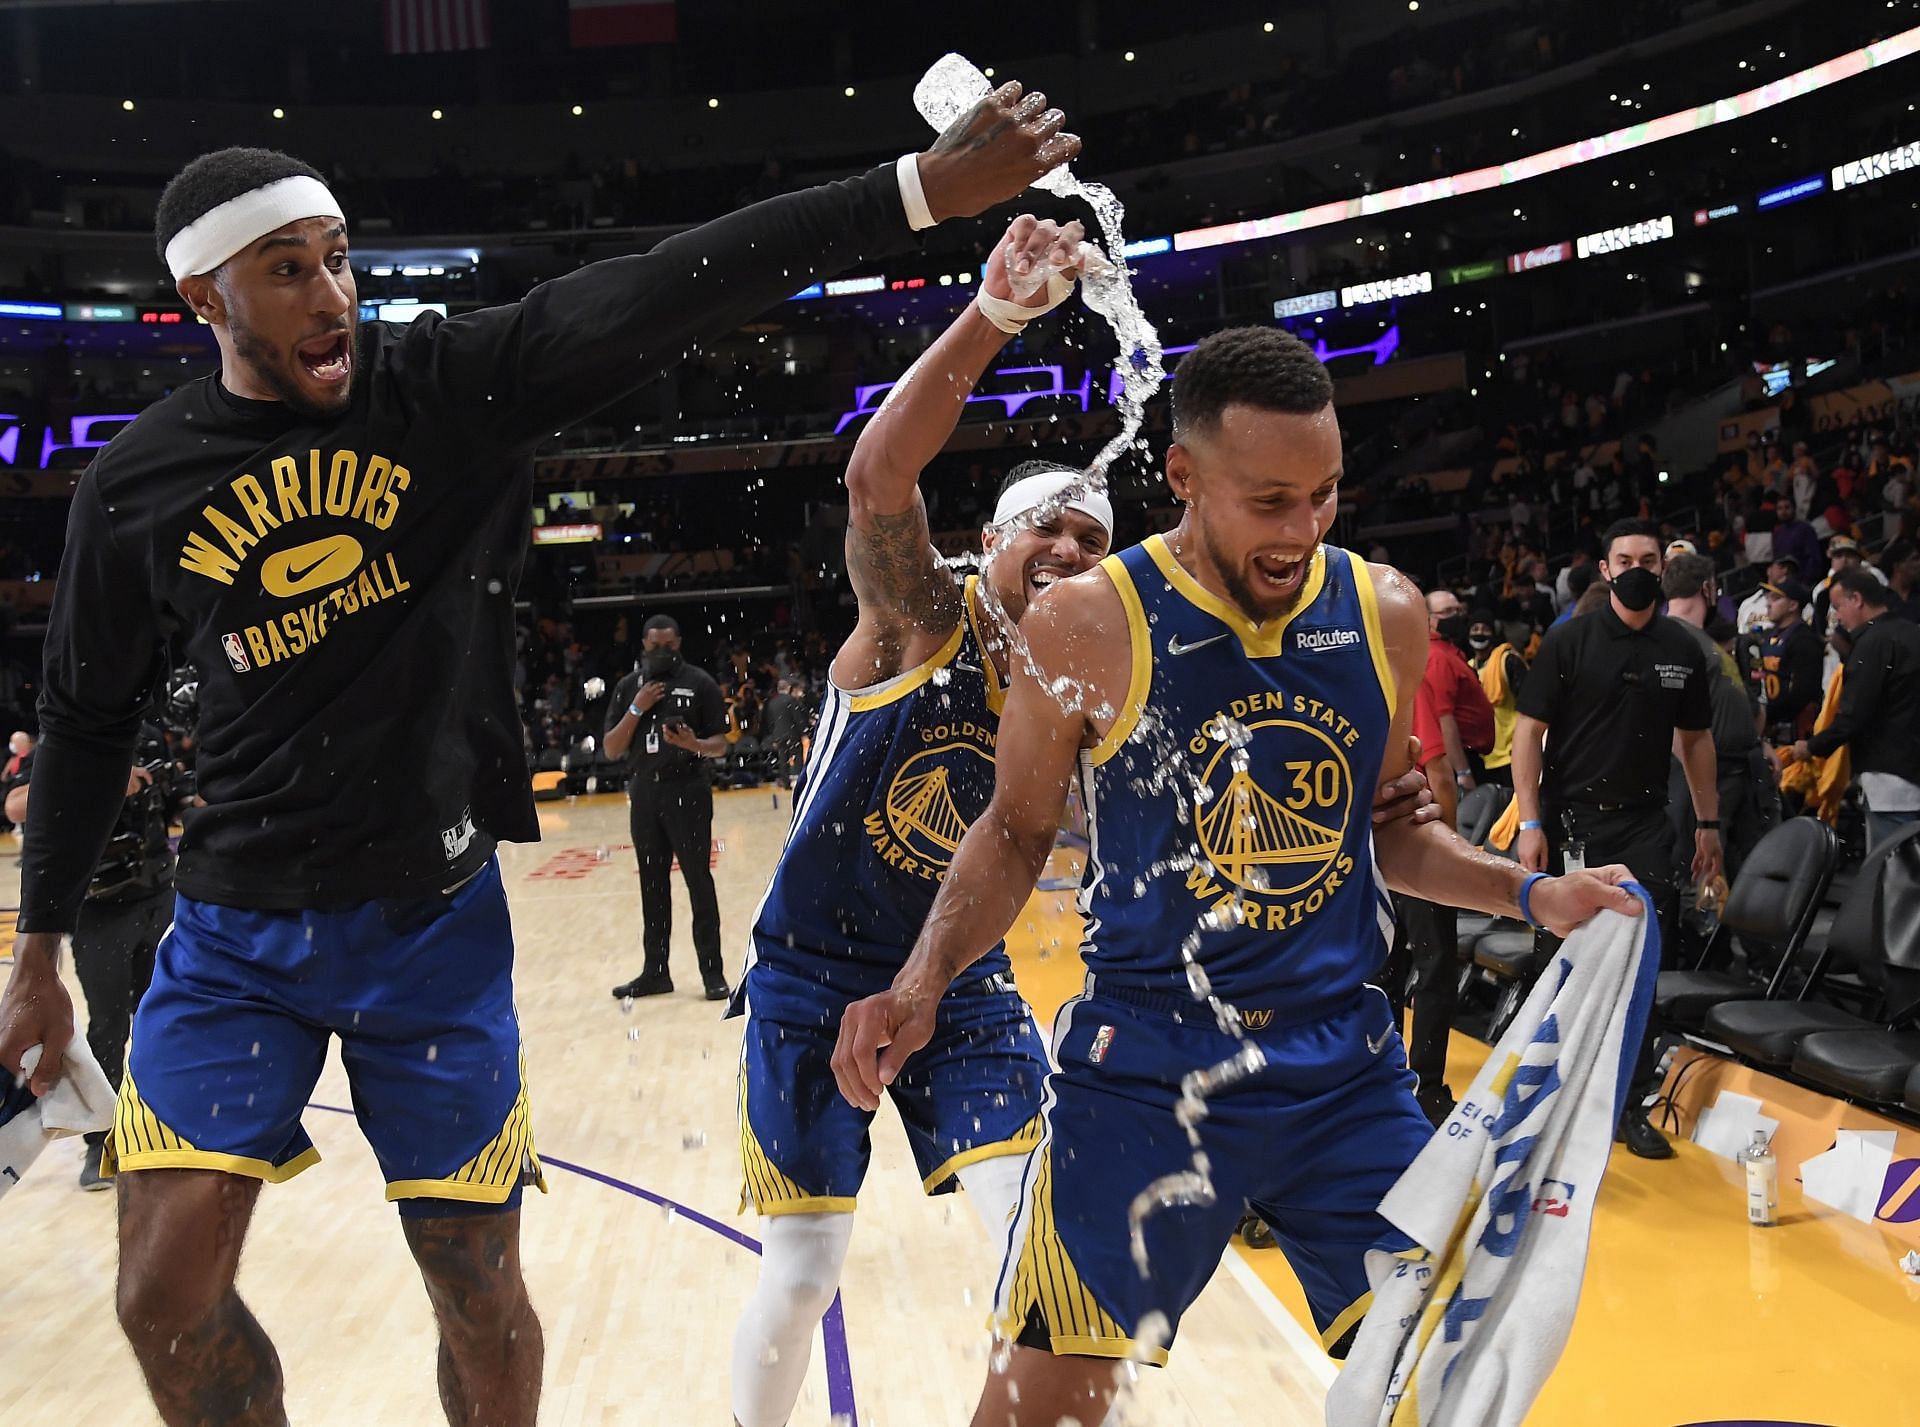 Gary Payton II and Damion Lee of the Golden State Warriors shower Stephen Curry with water